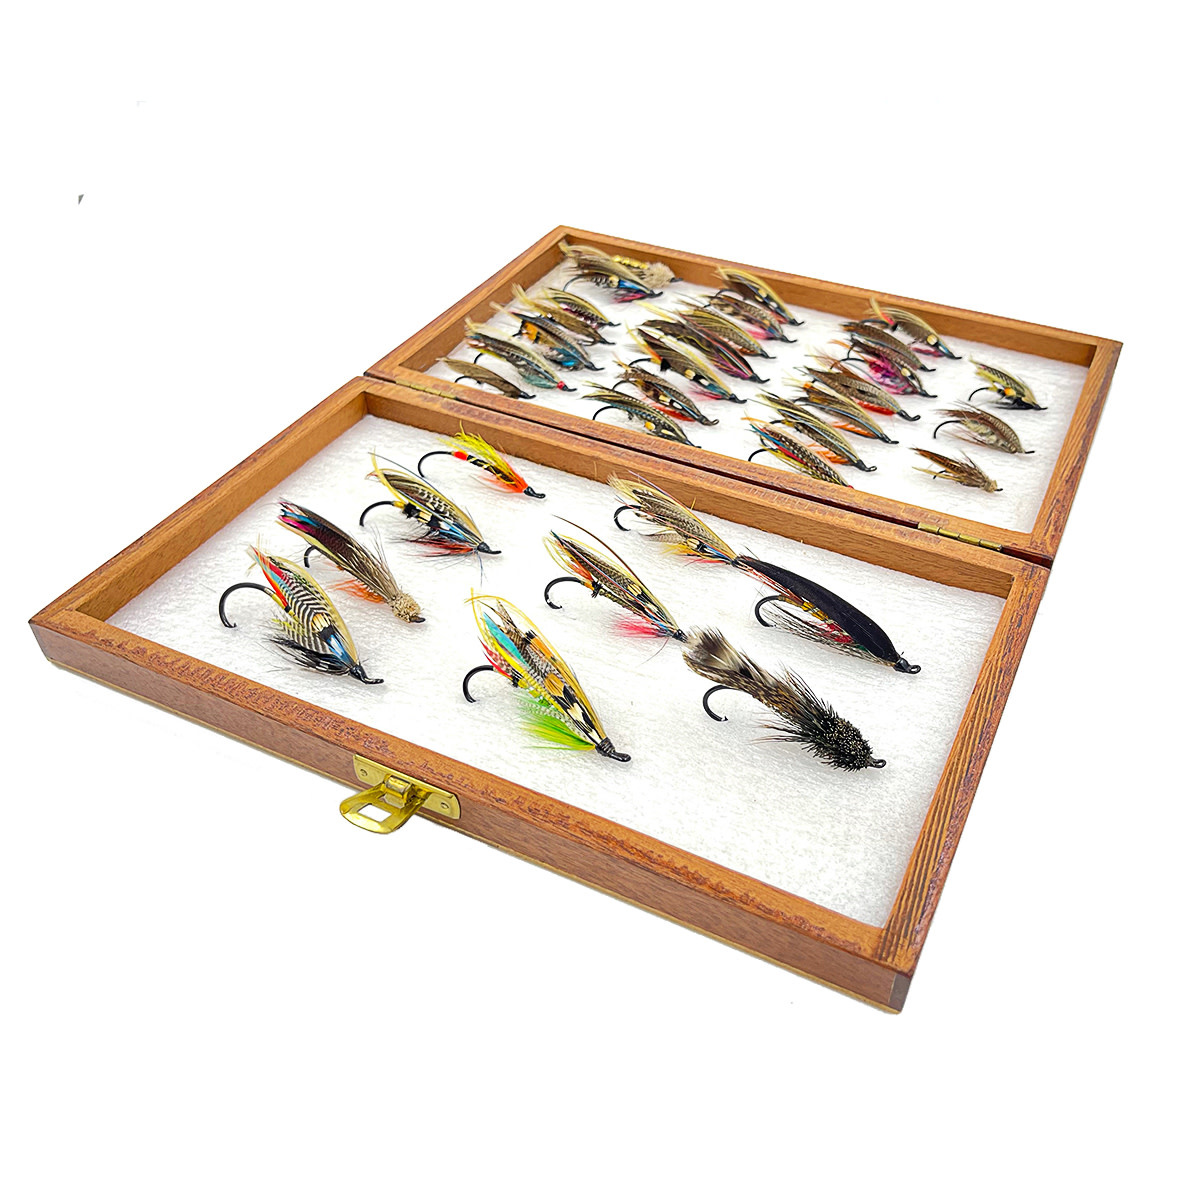 ☆ Various Dry Flies In a Wooden Box ☆